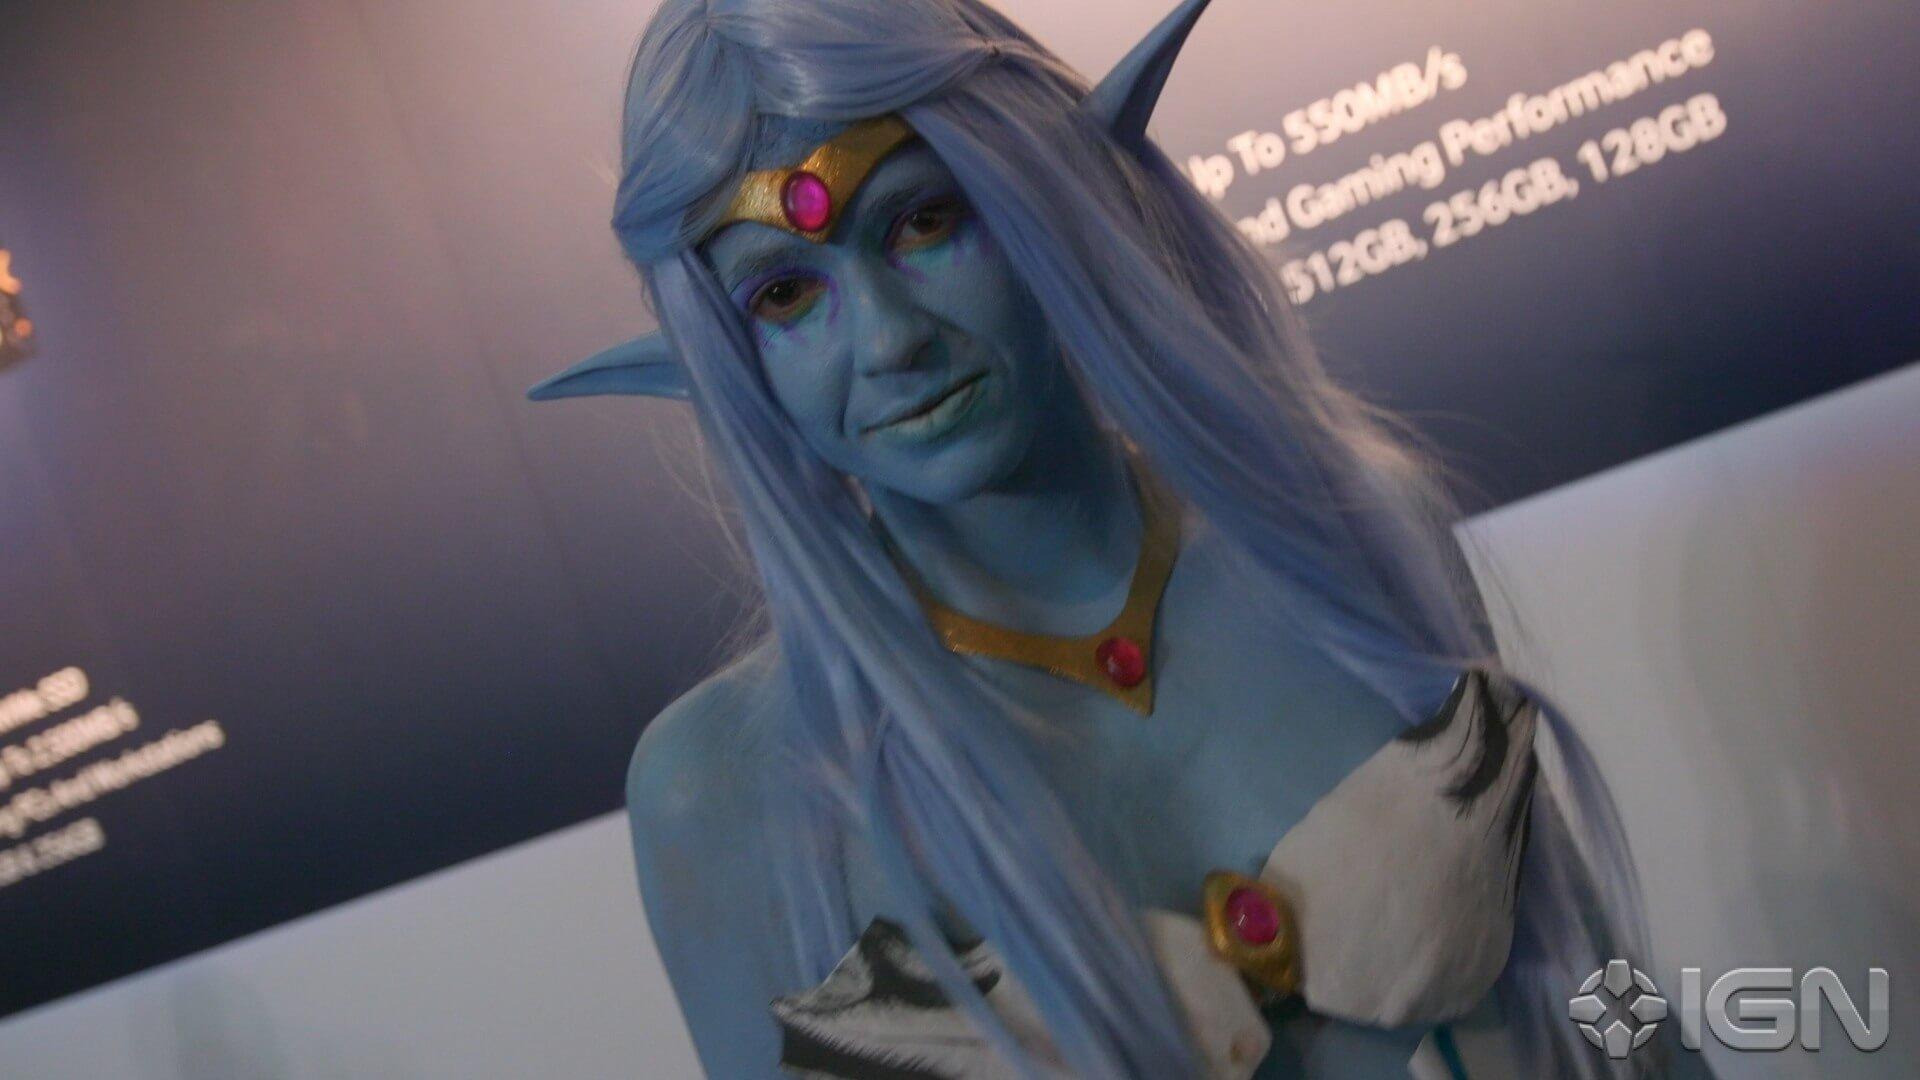 49 Hot Pictures Of Queen Azshara From The World Of Warcraft Which Will Rock Your World | Best Of Comic Books